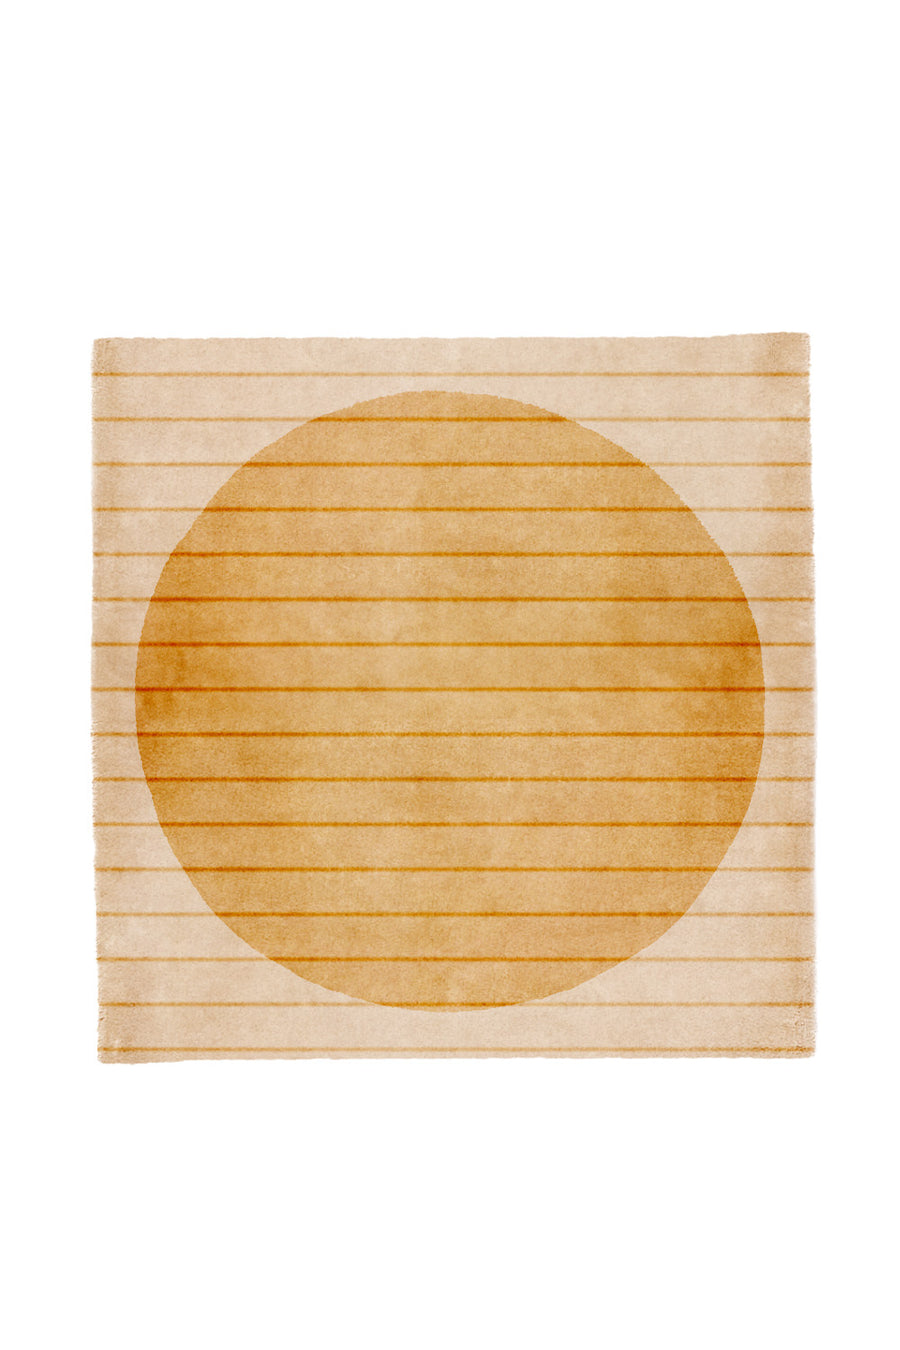 Golden Geometry Square Hand Tufted Wool Rug showcasing its central sun symbol and gold stripes